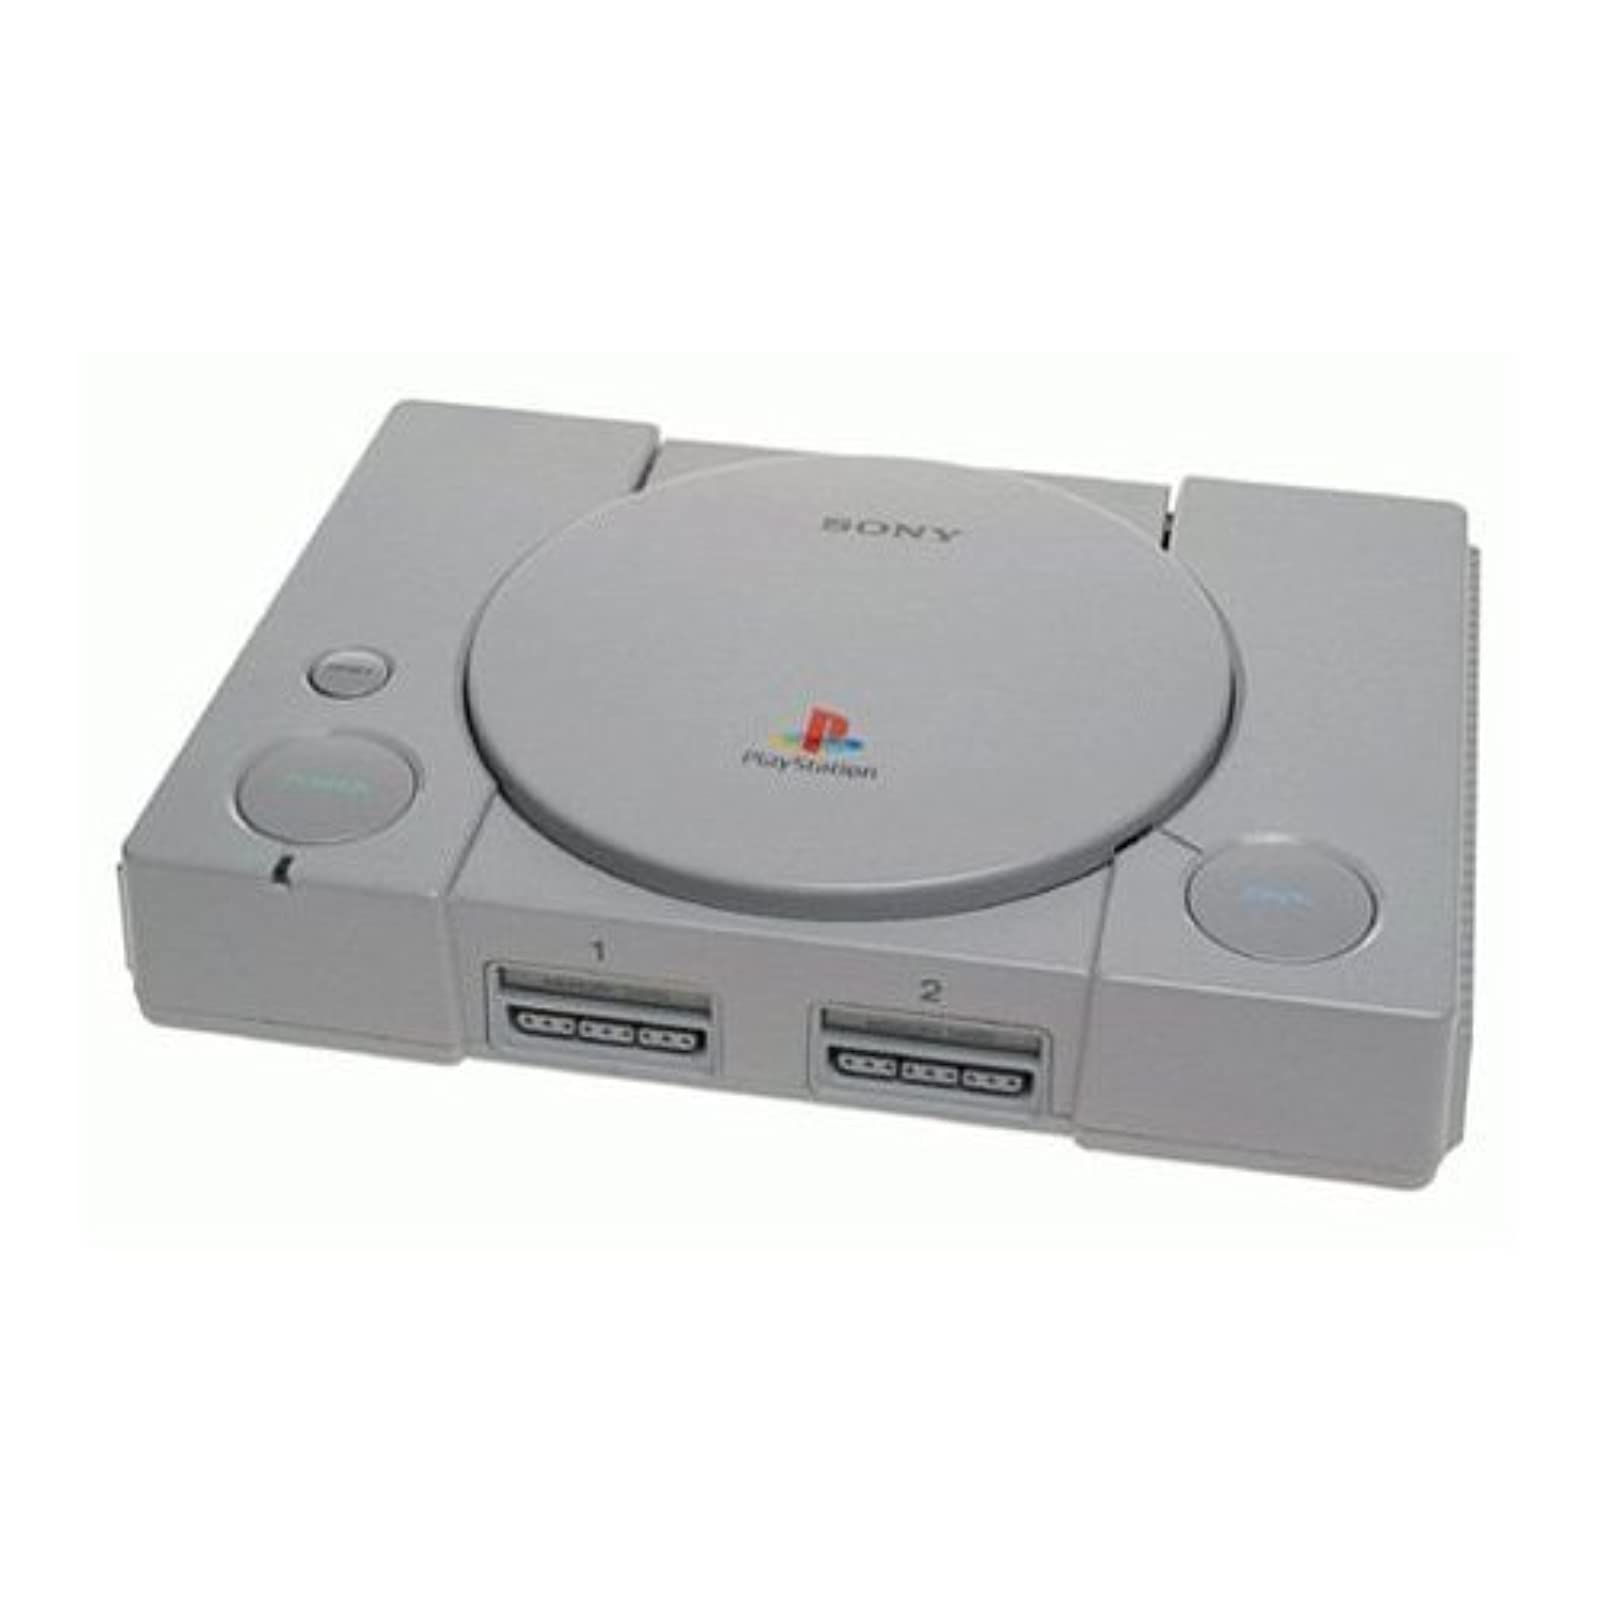 Restored Sony PlayStation 1 Console (Refurbished) - image 1 of 3